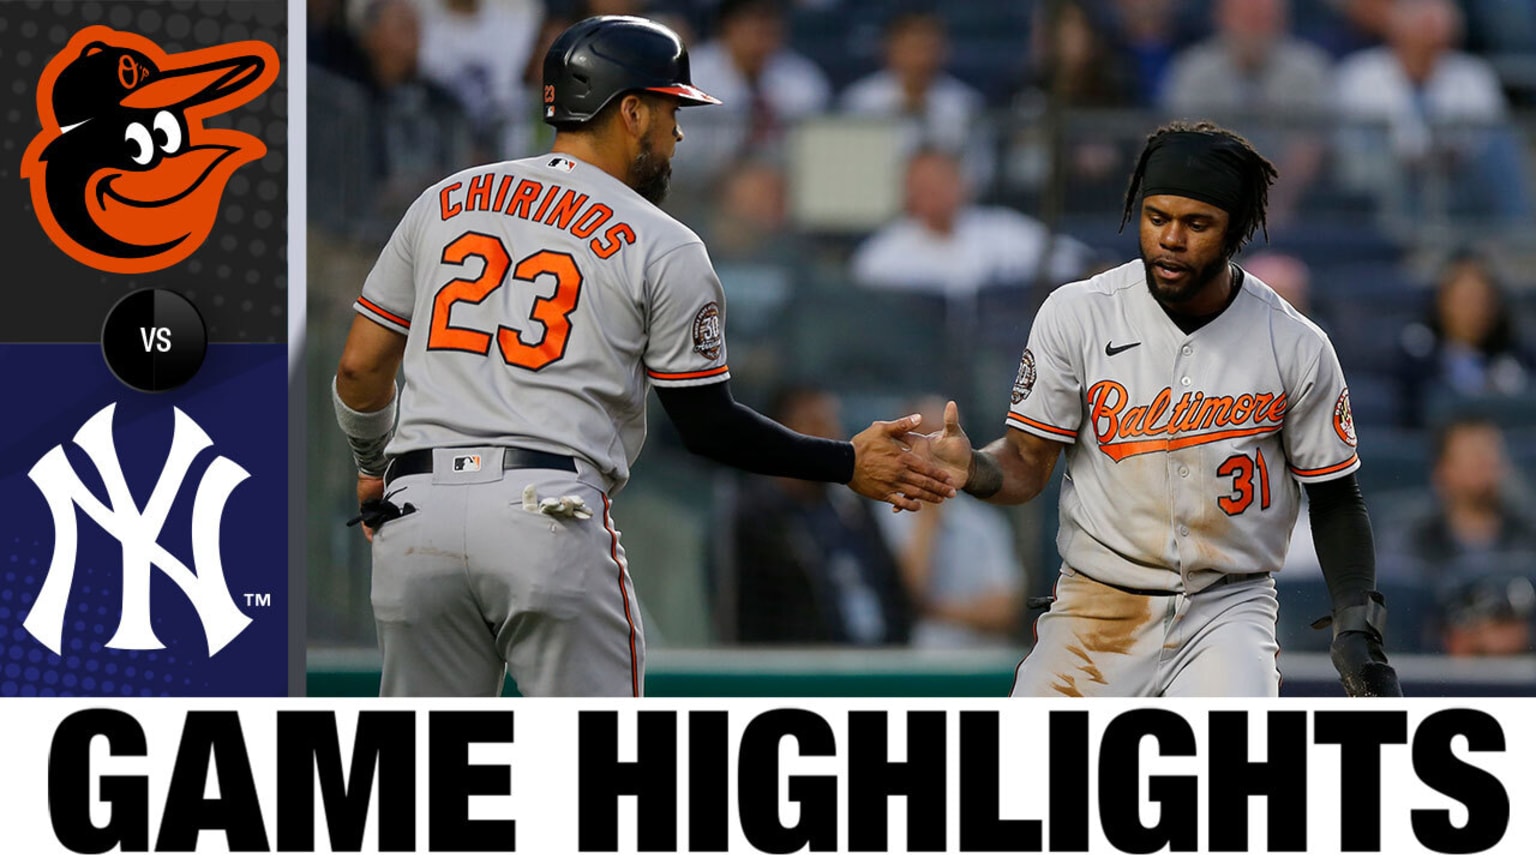 Orioles vs. Yankees Highlights 05/23/2022 Chicago Cubs